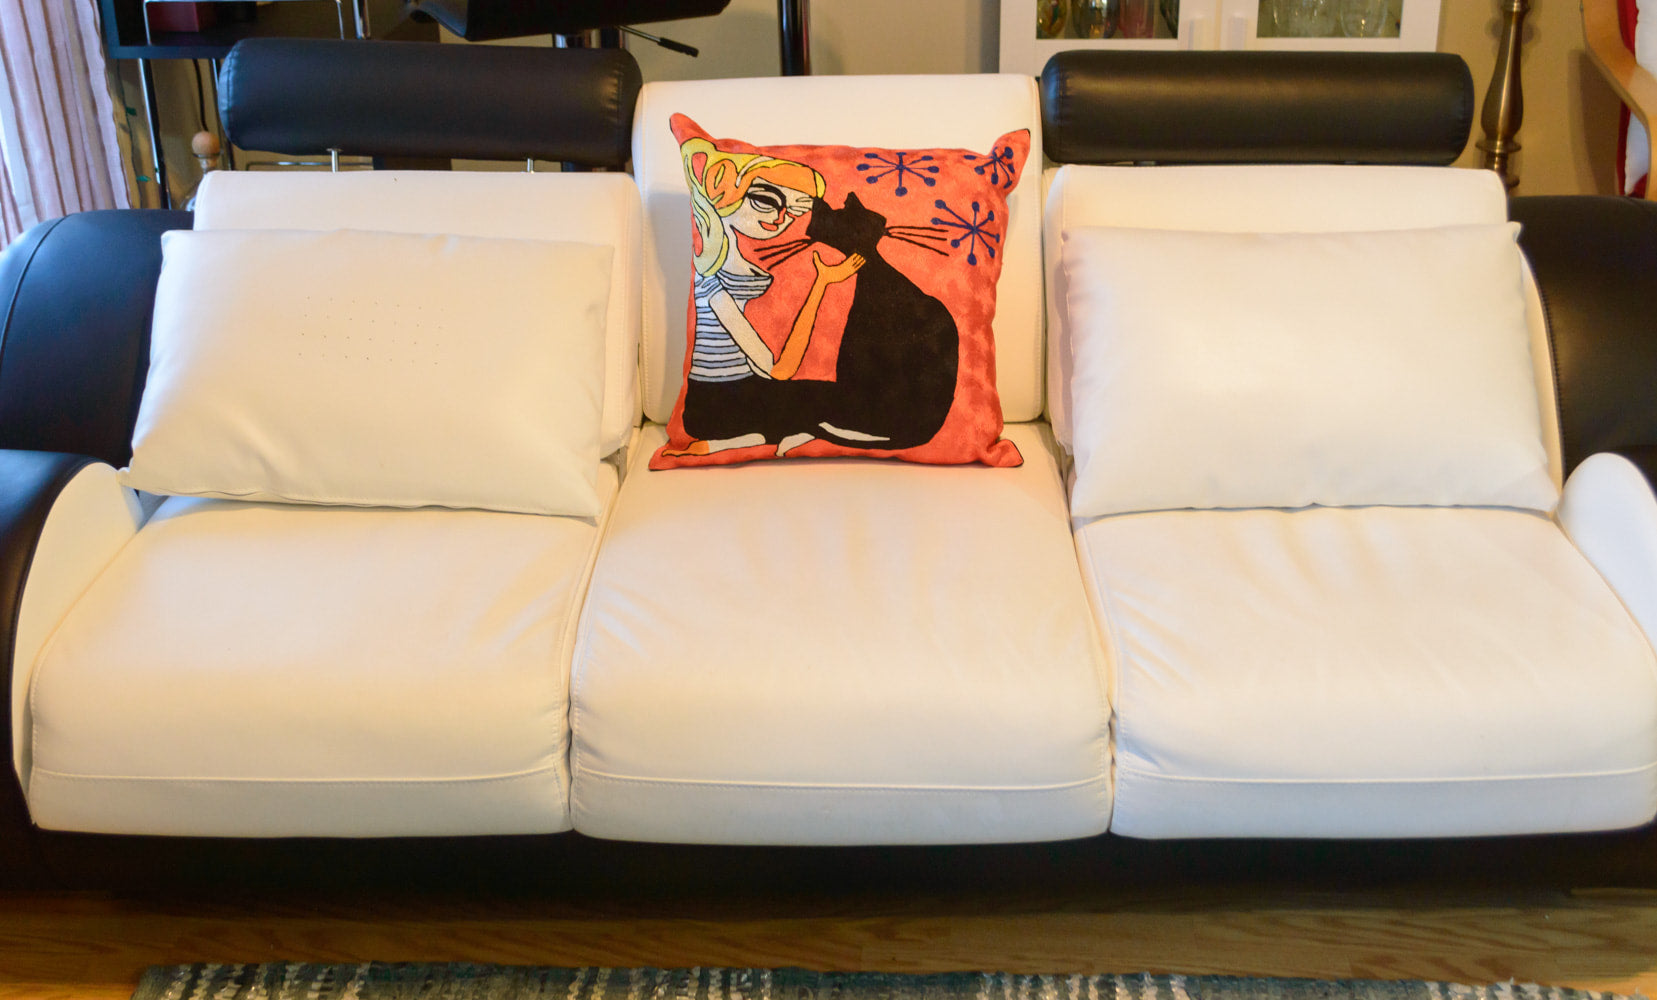 A cushion kept in the center on a white and black sofa. The cushion is having the design of a girl sitting next to her pet black cat and petting her with her hand on her neck. The background is orange color with 3 blue star like shapes.